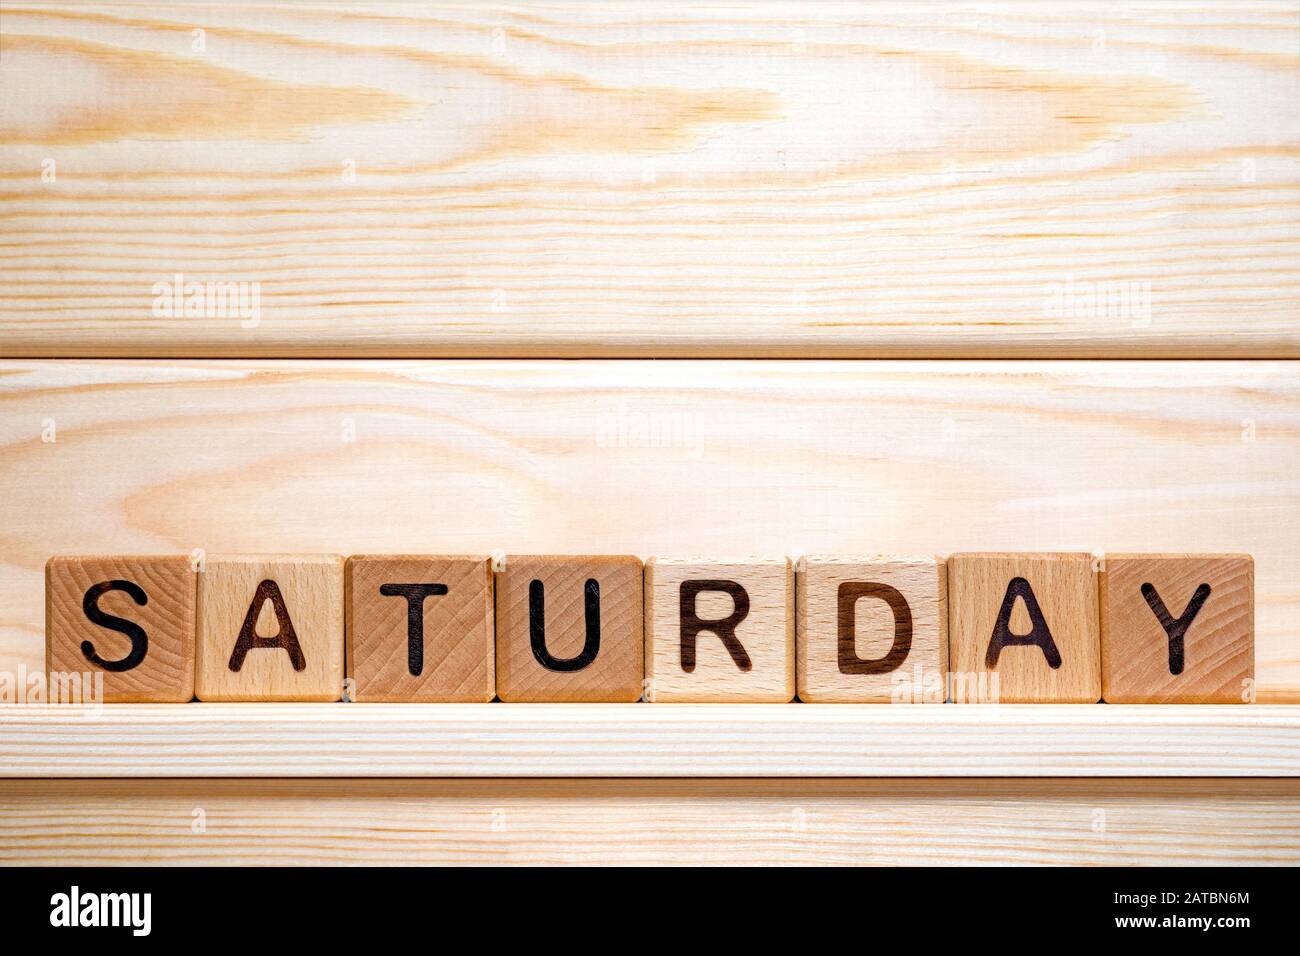 Saturday word written with vintage wooden cubes on wooden background. Day off background. Business concept. Small business. The word Saturday on wooden cubes. Weekday business concept. Stock Photo